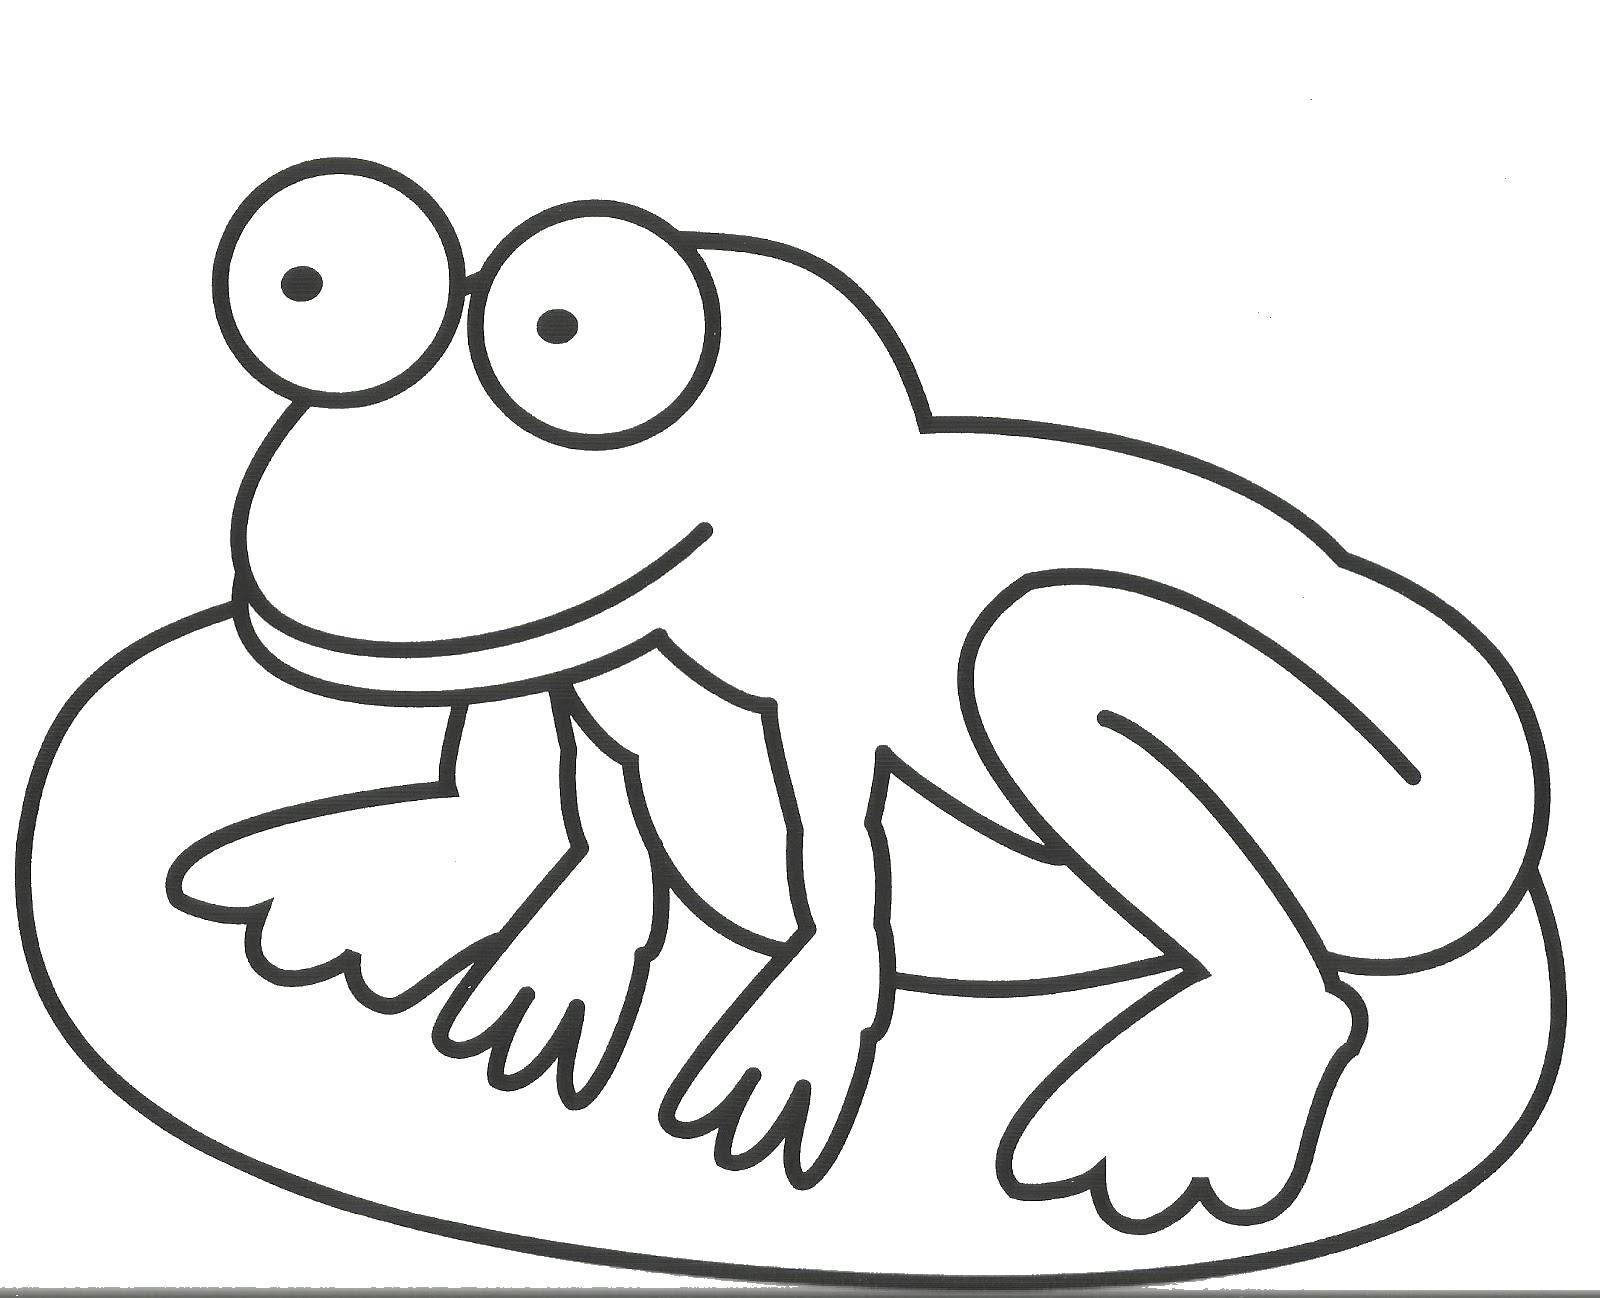 Coloring Cute frog. Category Animals. Tags:  frog, frogs, animals.